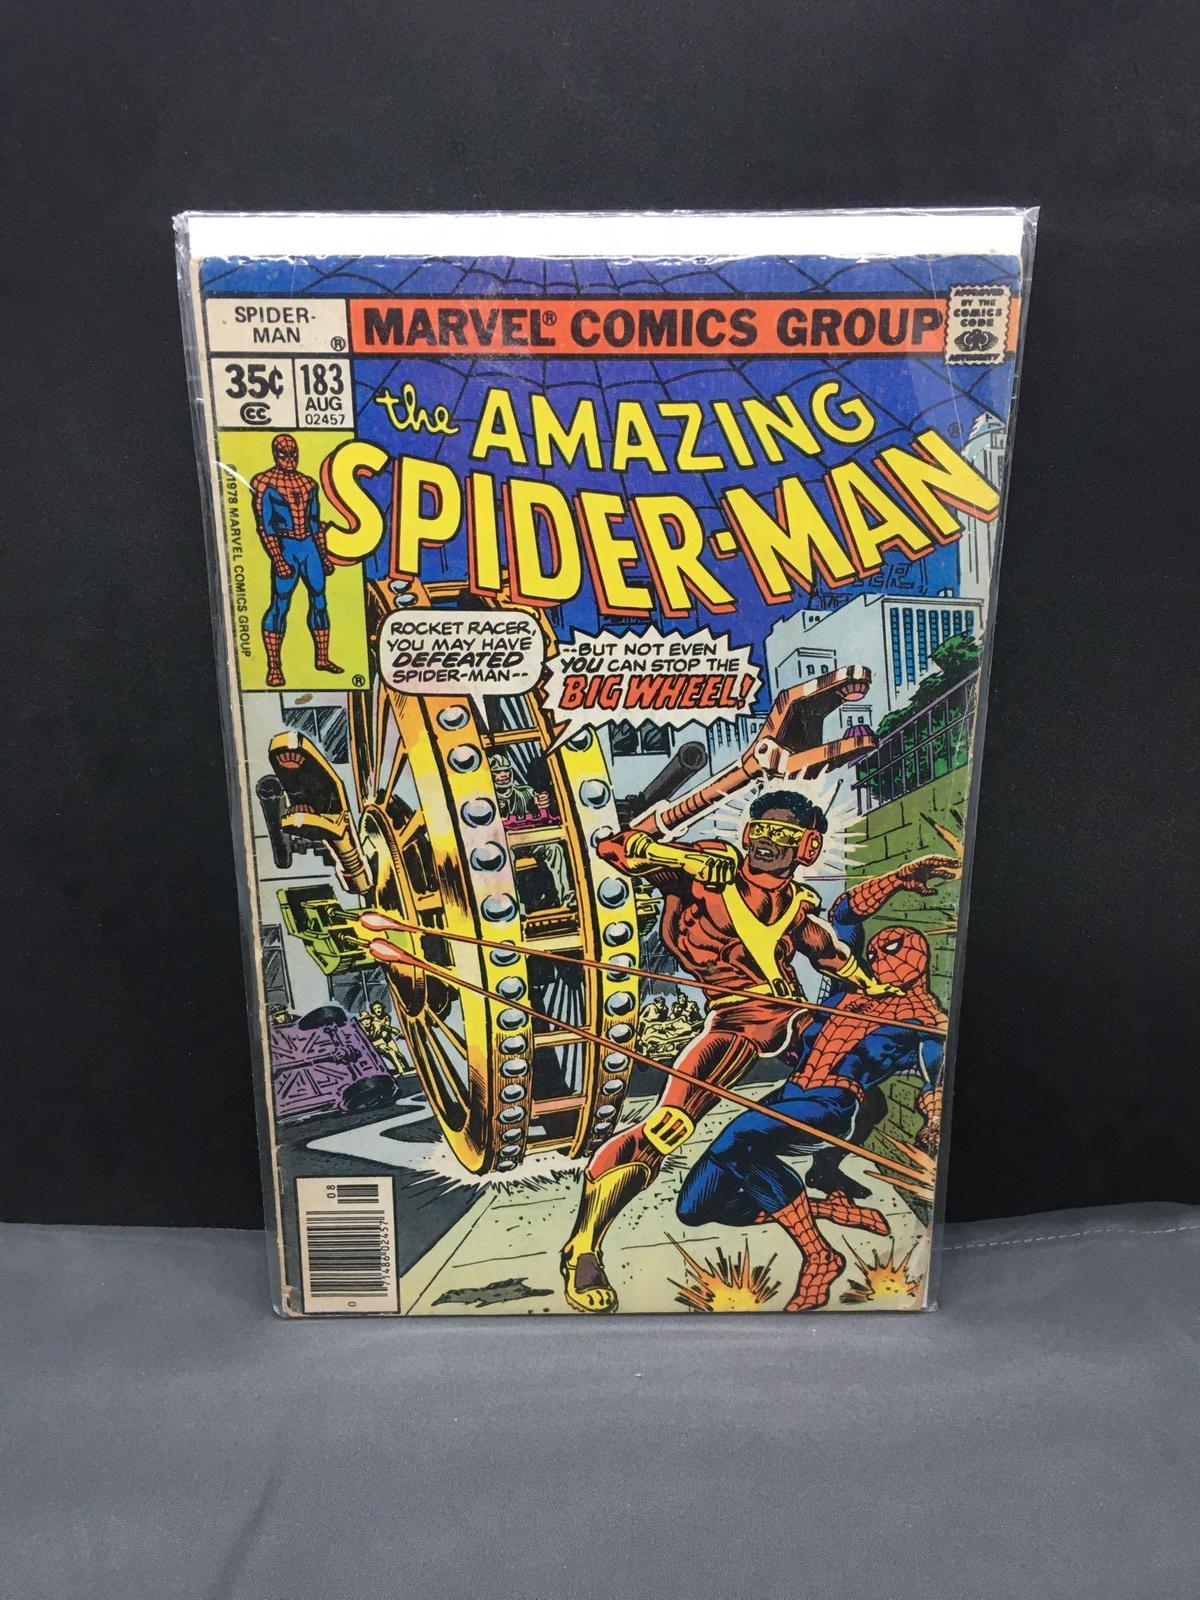 Vintage Marvel Comics THE AMAZING SPIDER-MAN #183 Bronze Age Comic Book from Collection Find